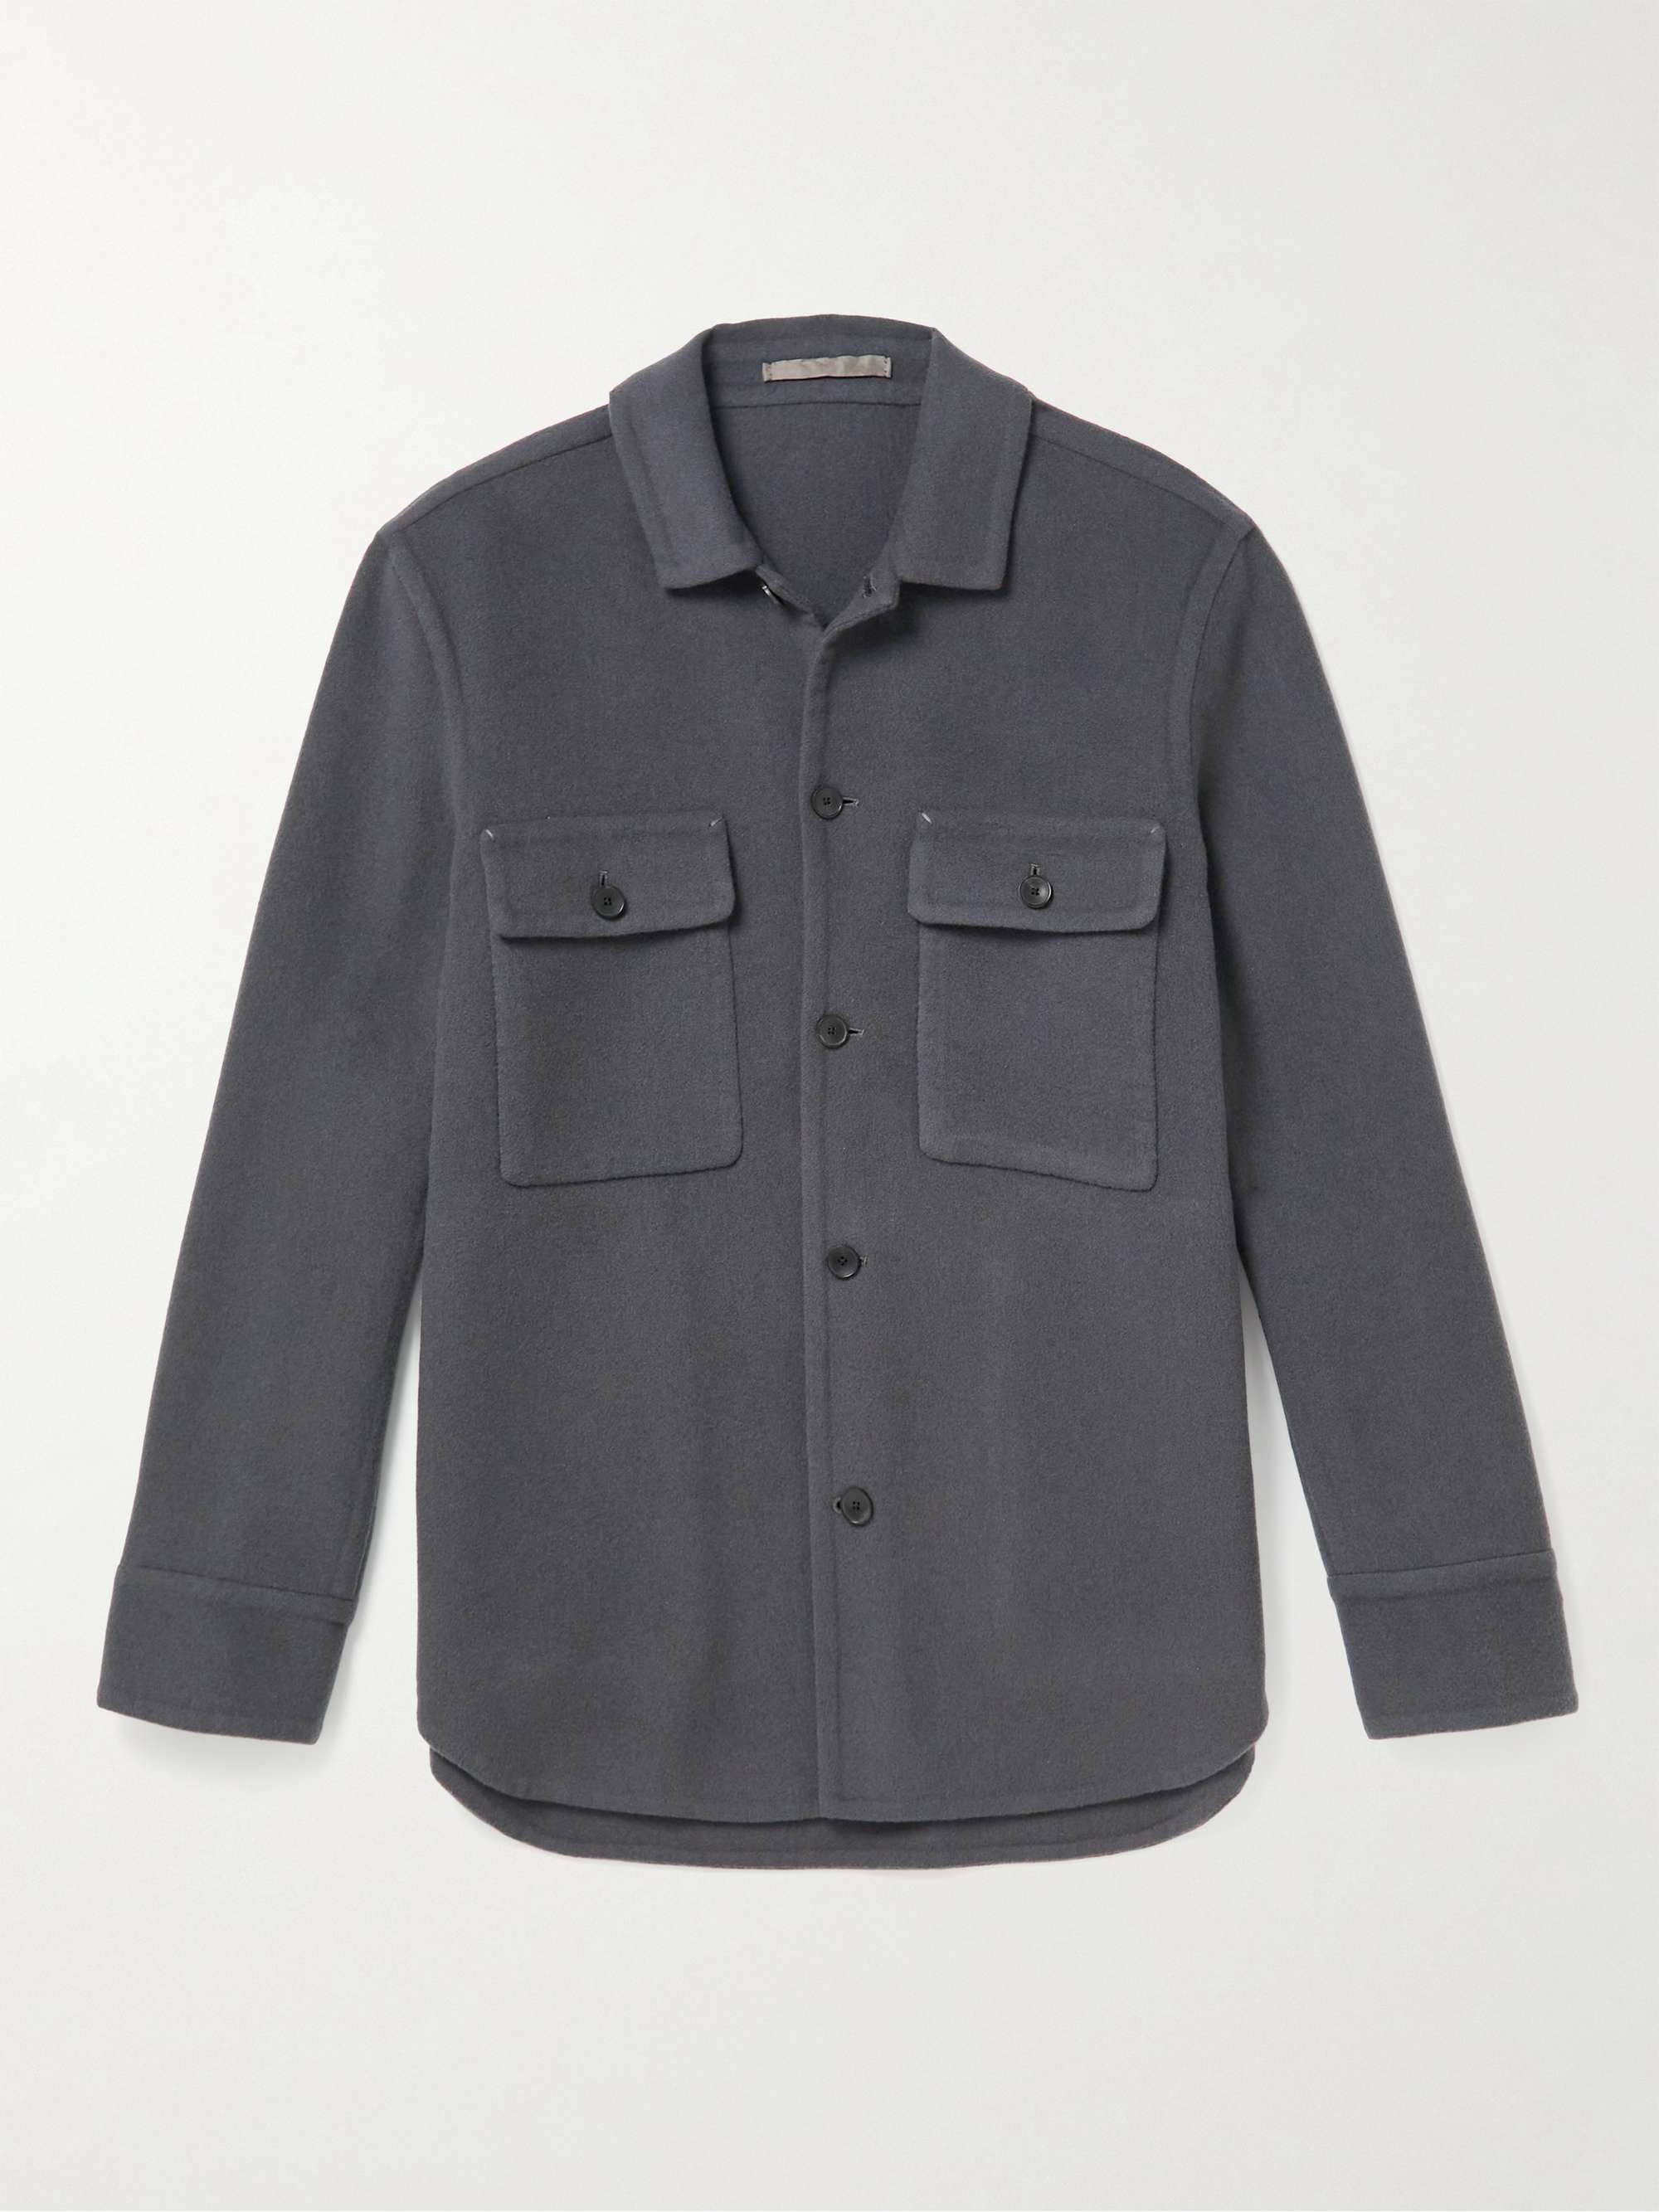 MR P. Double-Faced Splitable Cashmere and Virgin Wool-Blend Overshirt